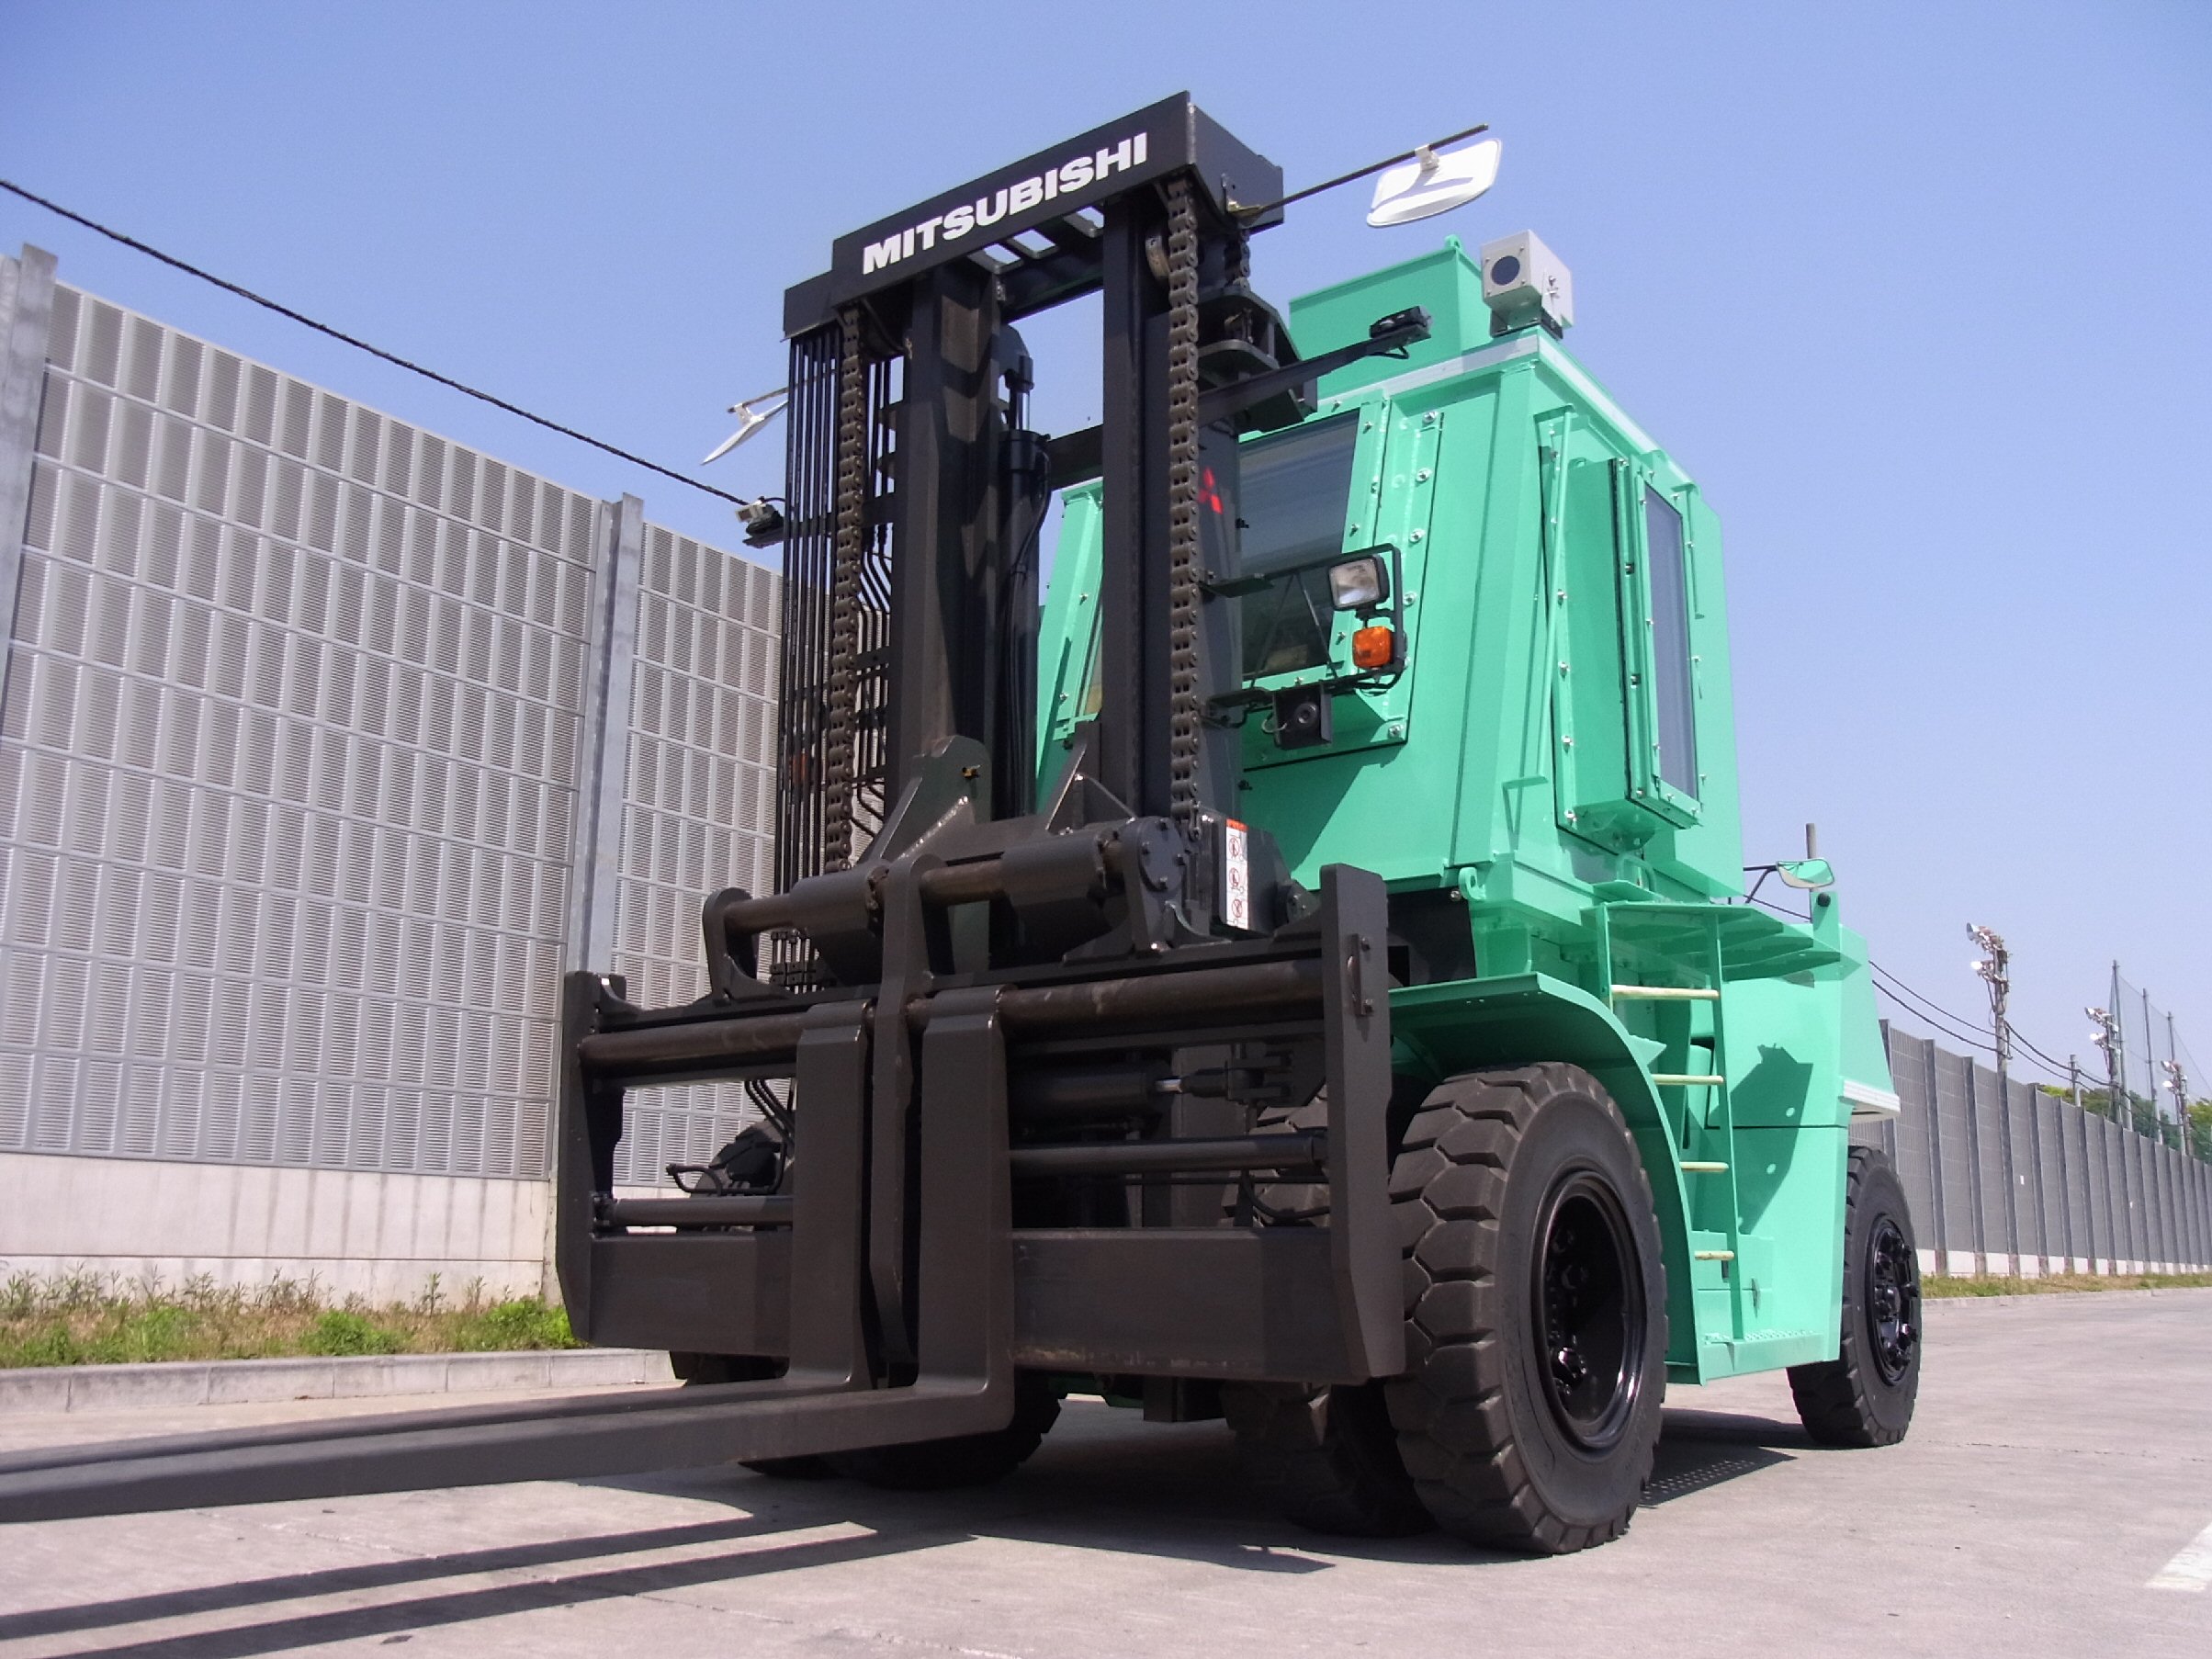 Forklift truck for removing rubble(source:Mitsubishi Heavy Industries, Ltd.)